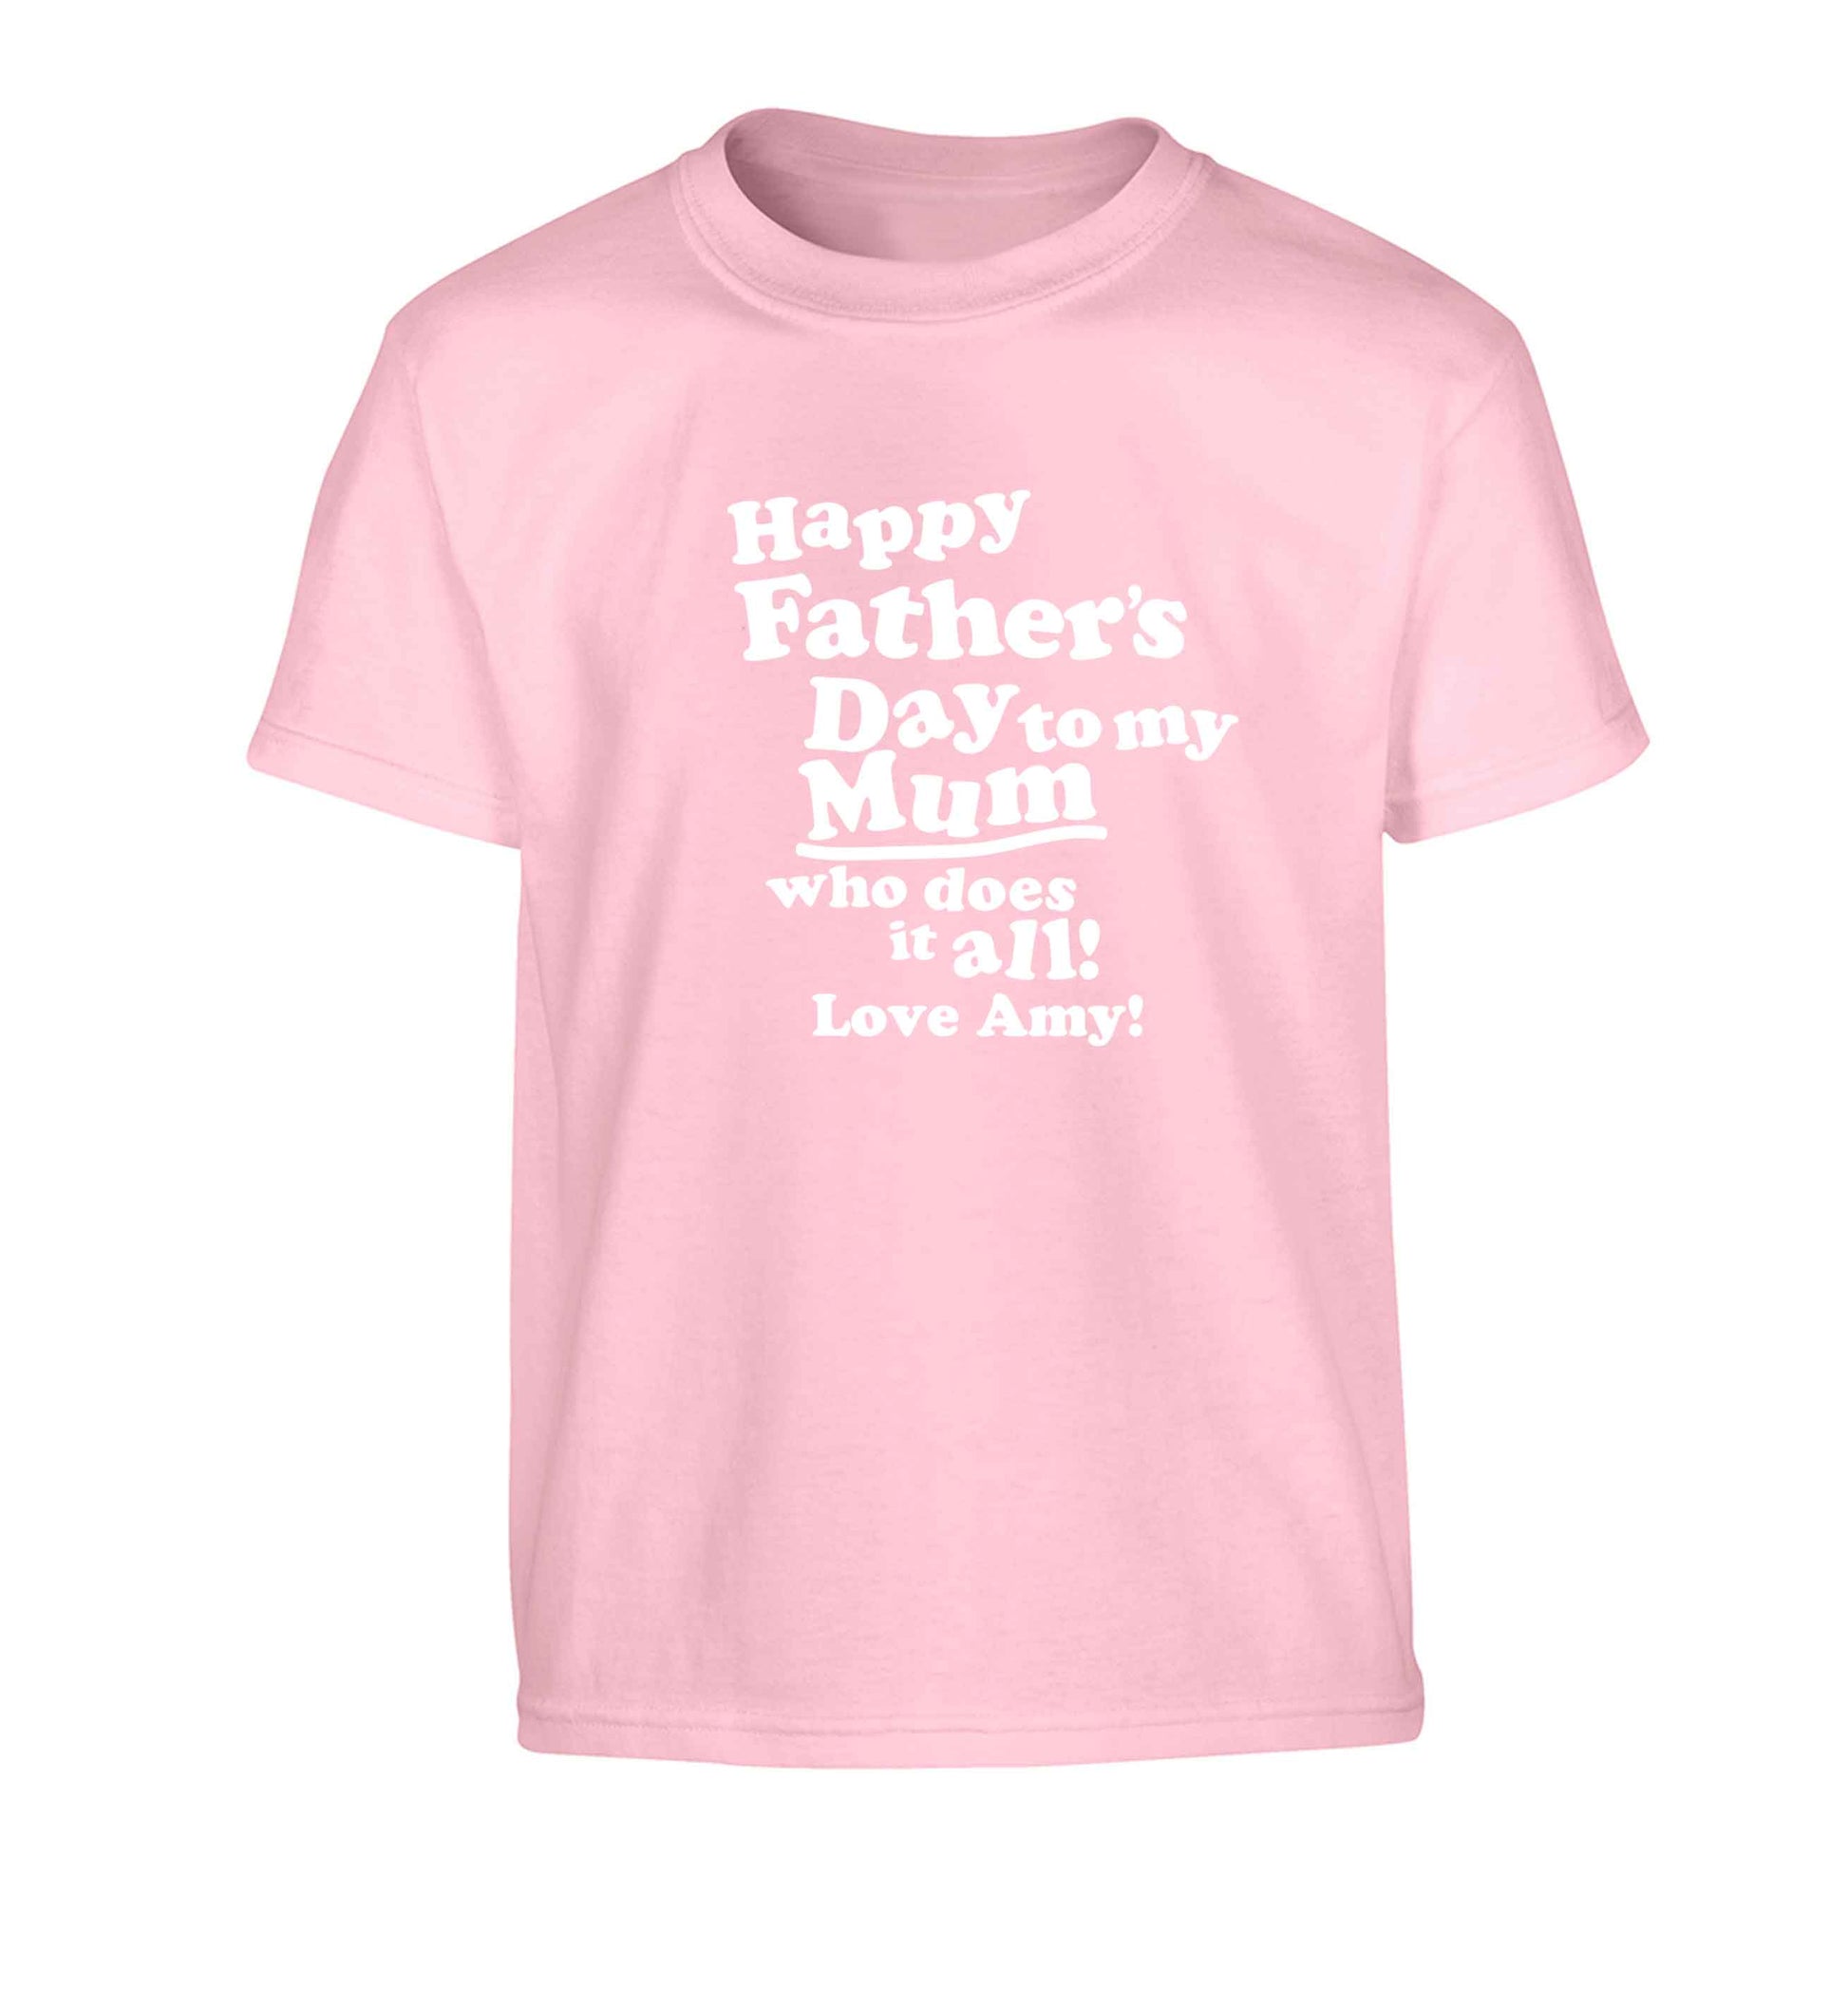 Happy Father's day to my mum who does it all Children's light pink Tshirt 12-13 Years